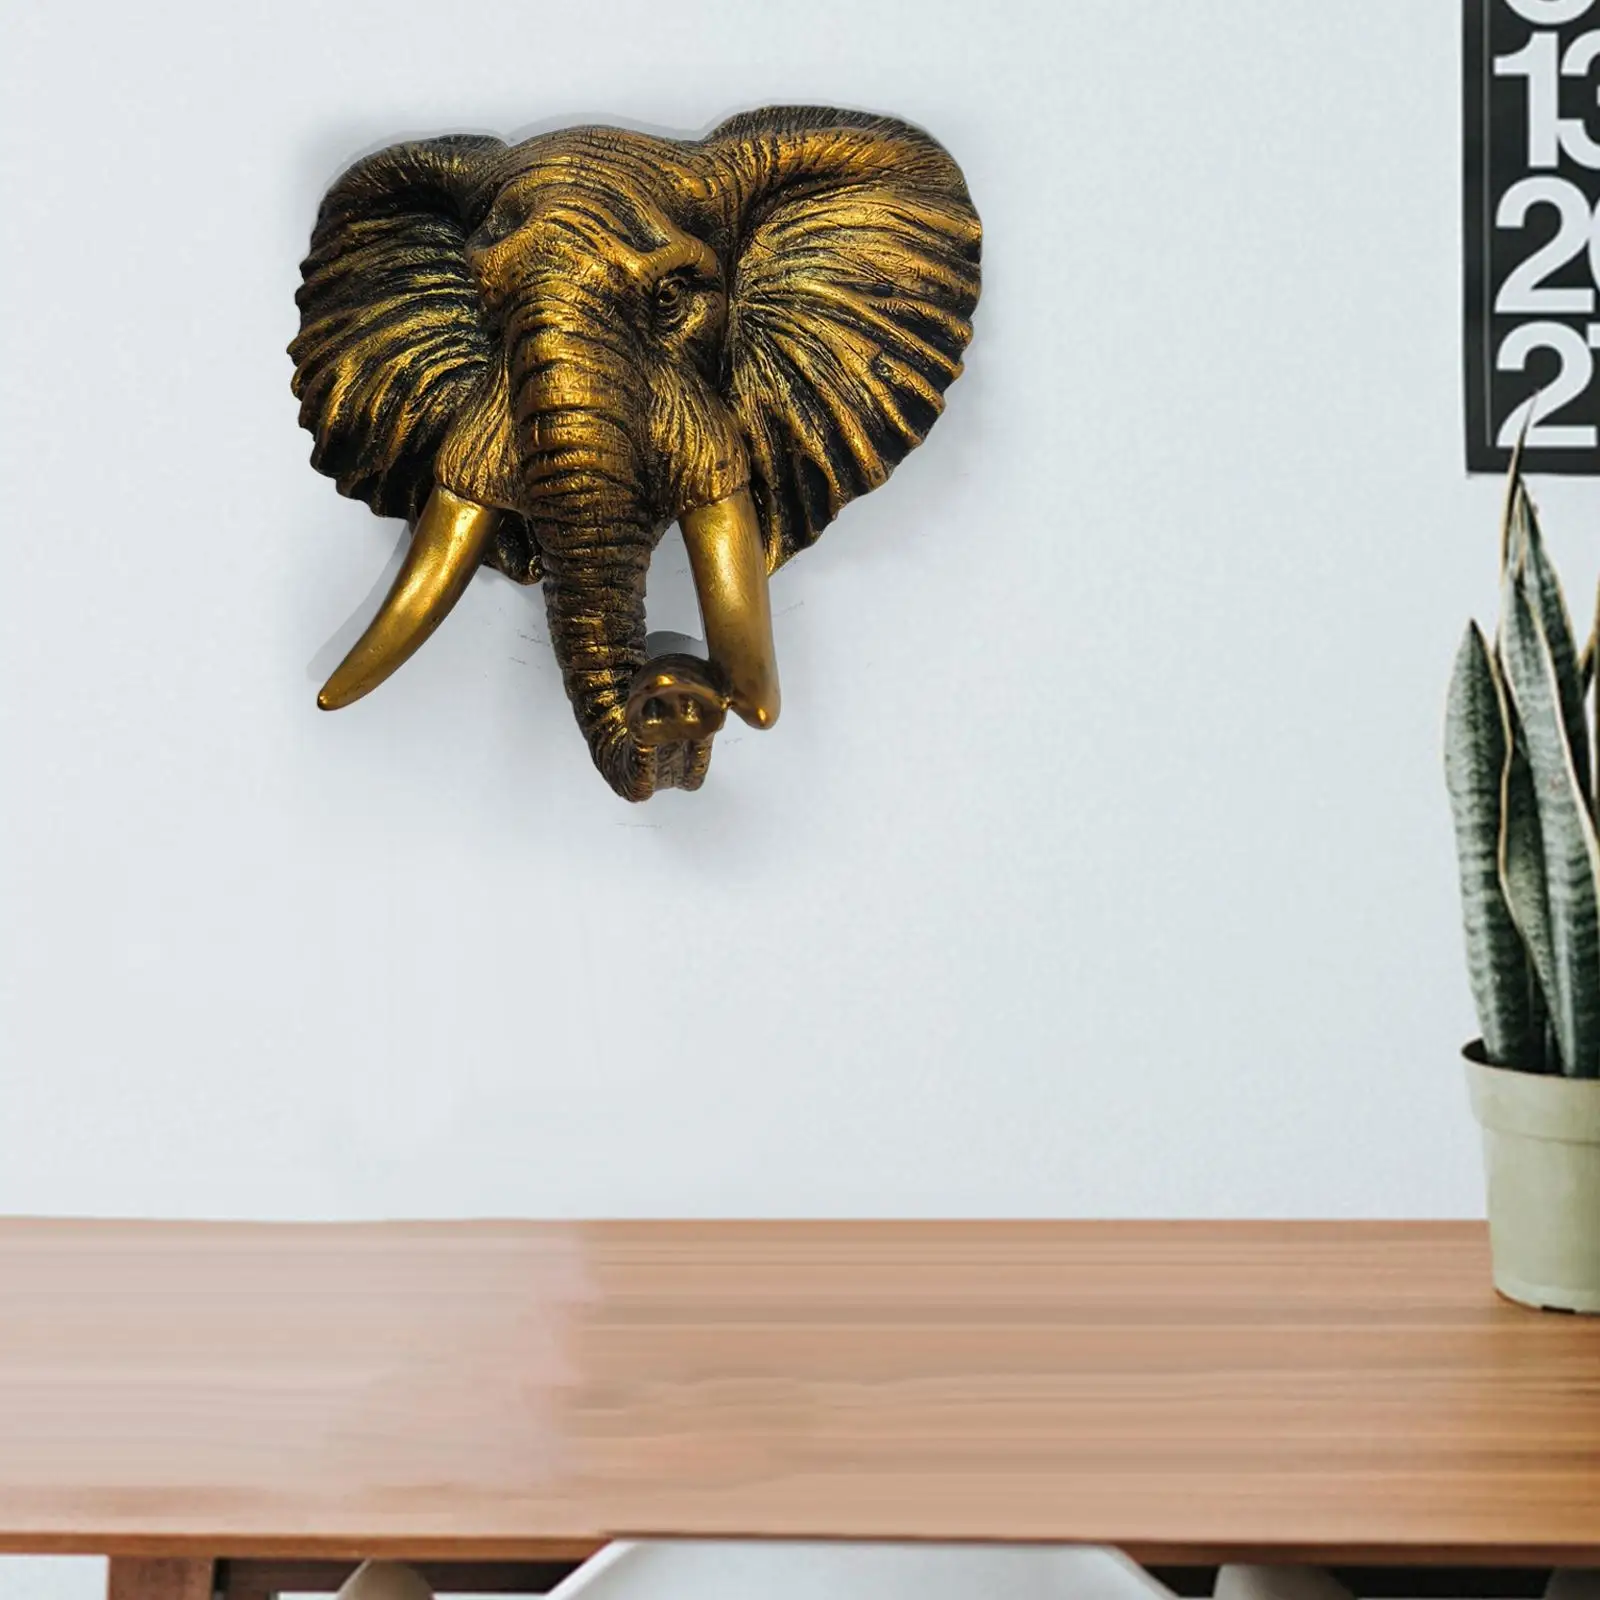 3D Resin Elephant Head Wall Statue Stylish Addition to Any Room for Living Room 7.8Inchx3.5Inchx8.5inch Indoor Outdoor Ornament